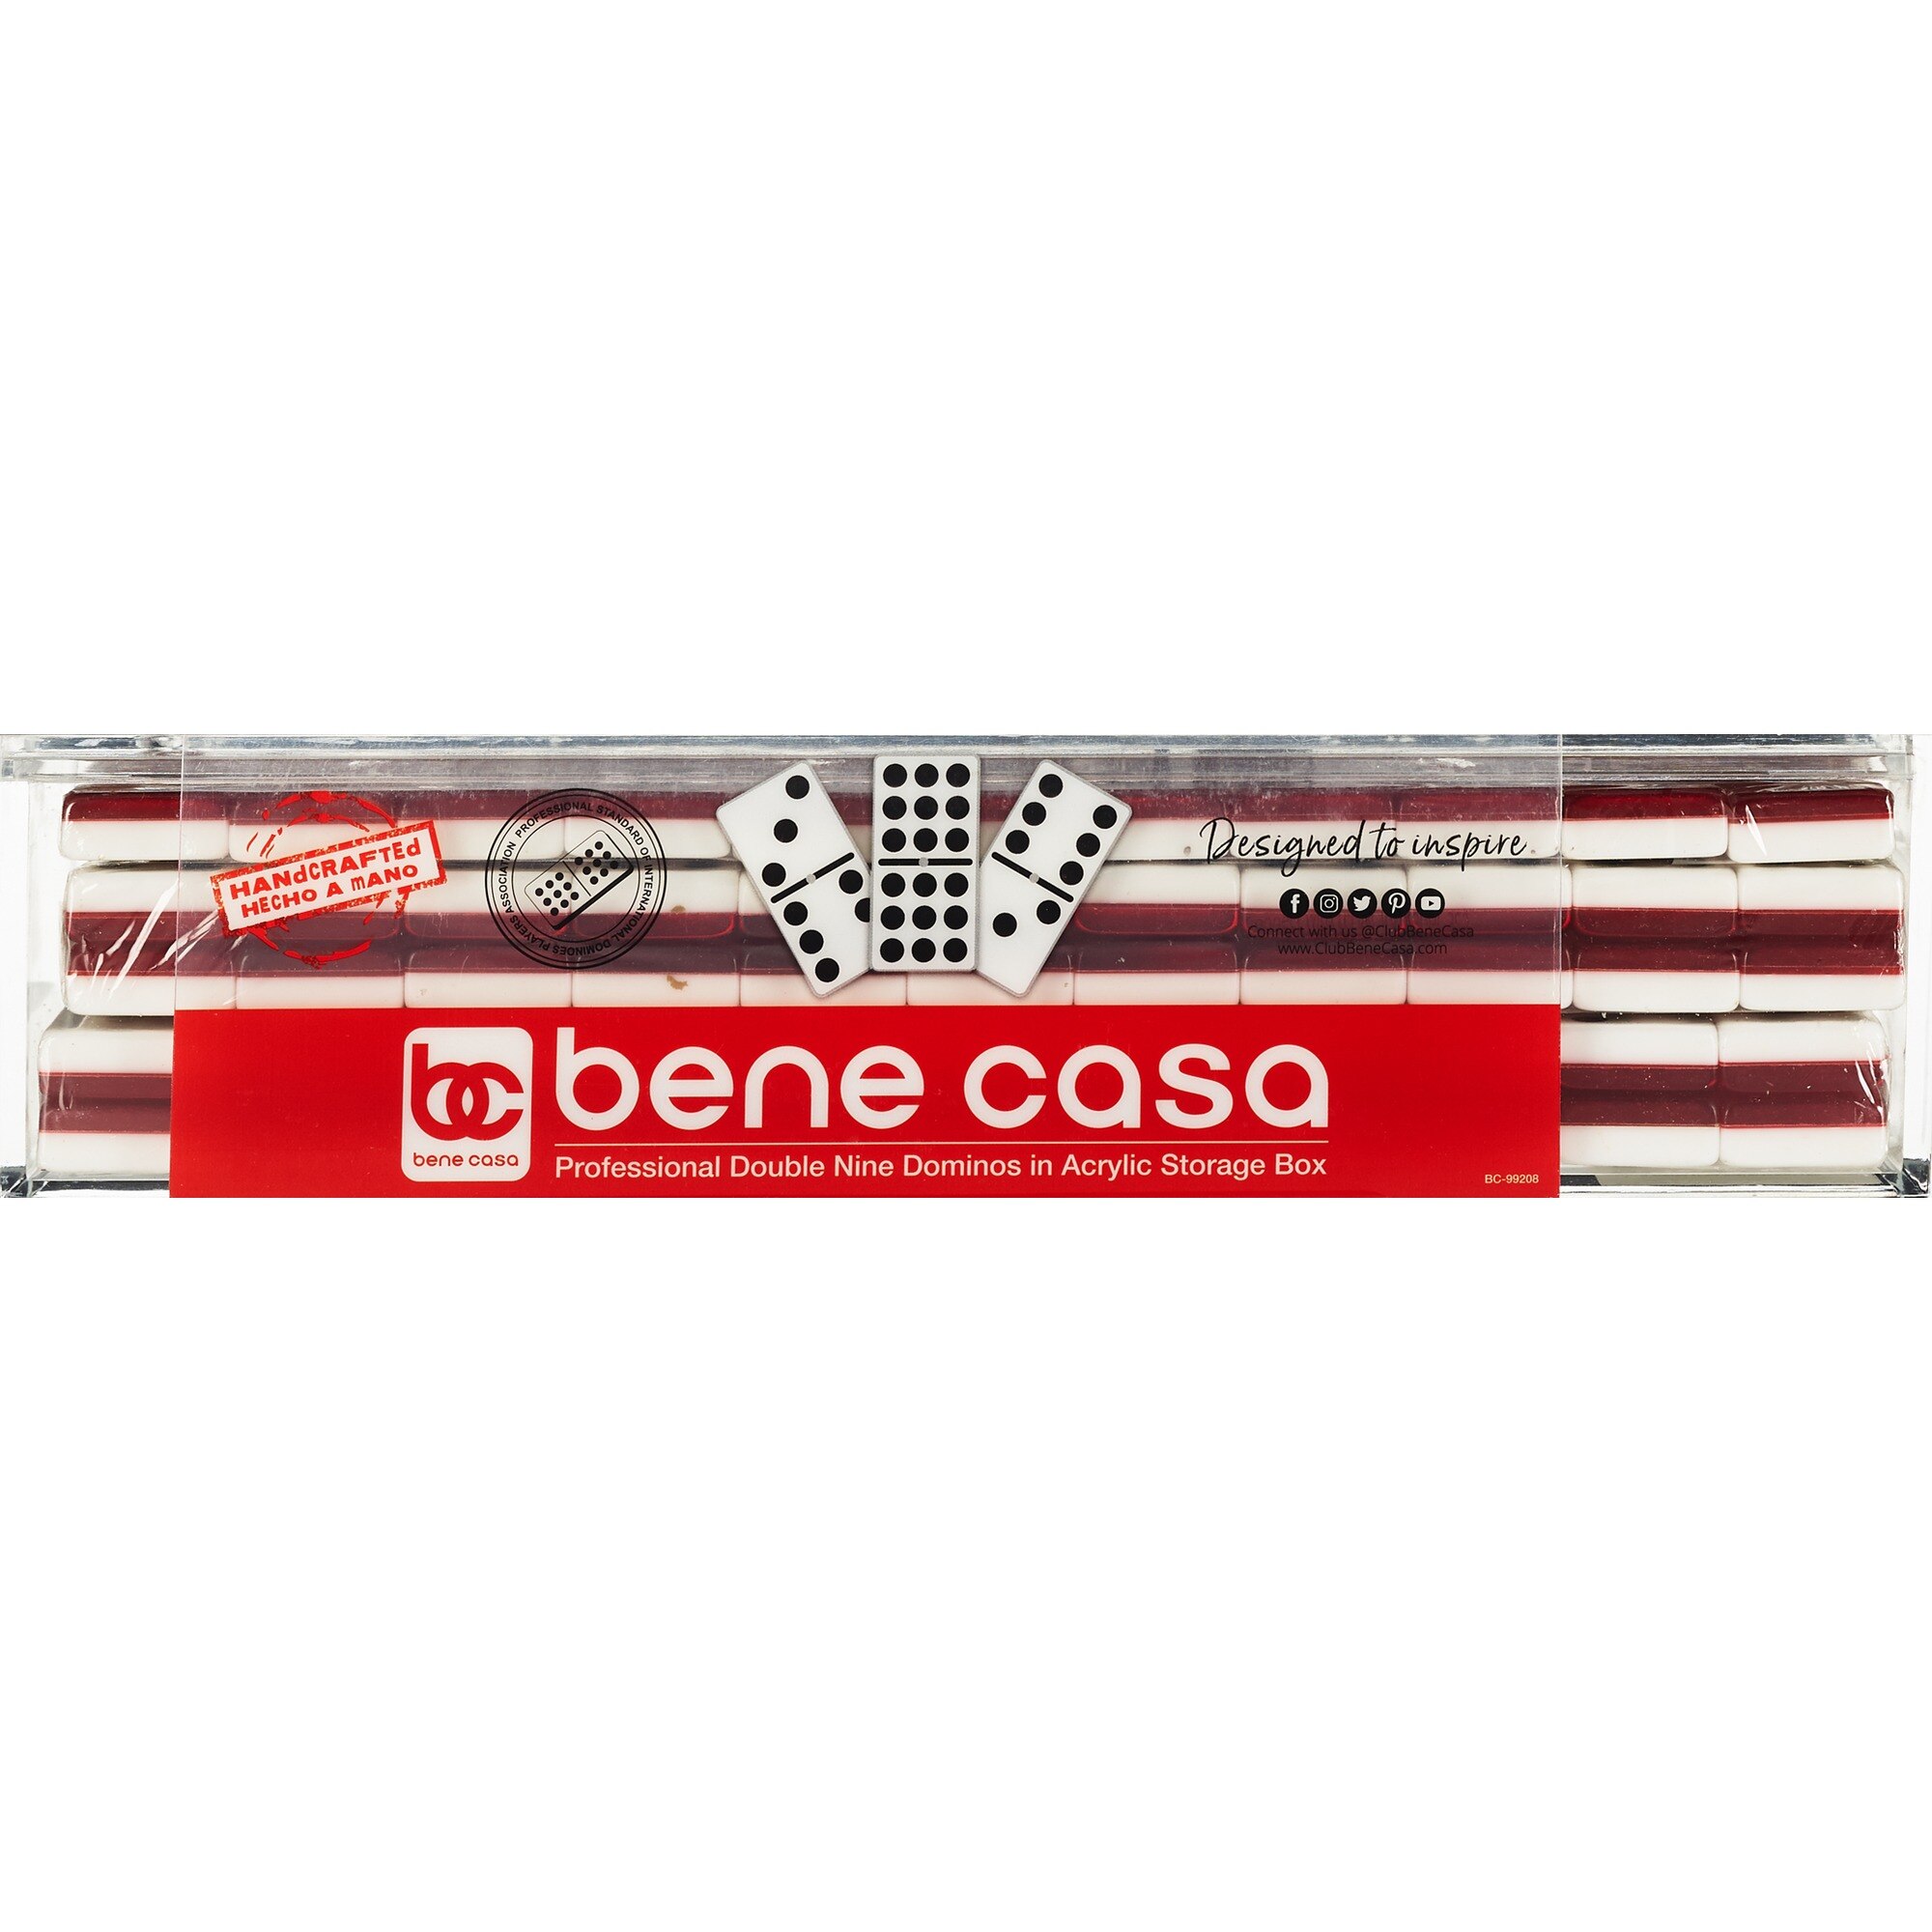 Bene Casa Double 9 Dominoes, Red, Clear Acrylic Box